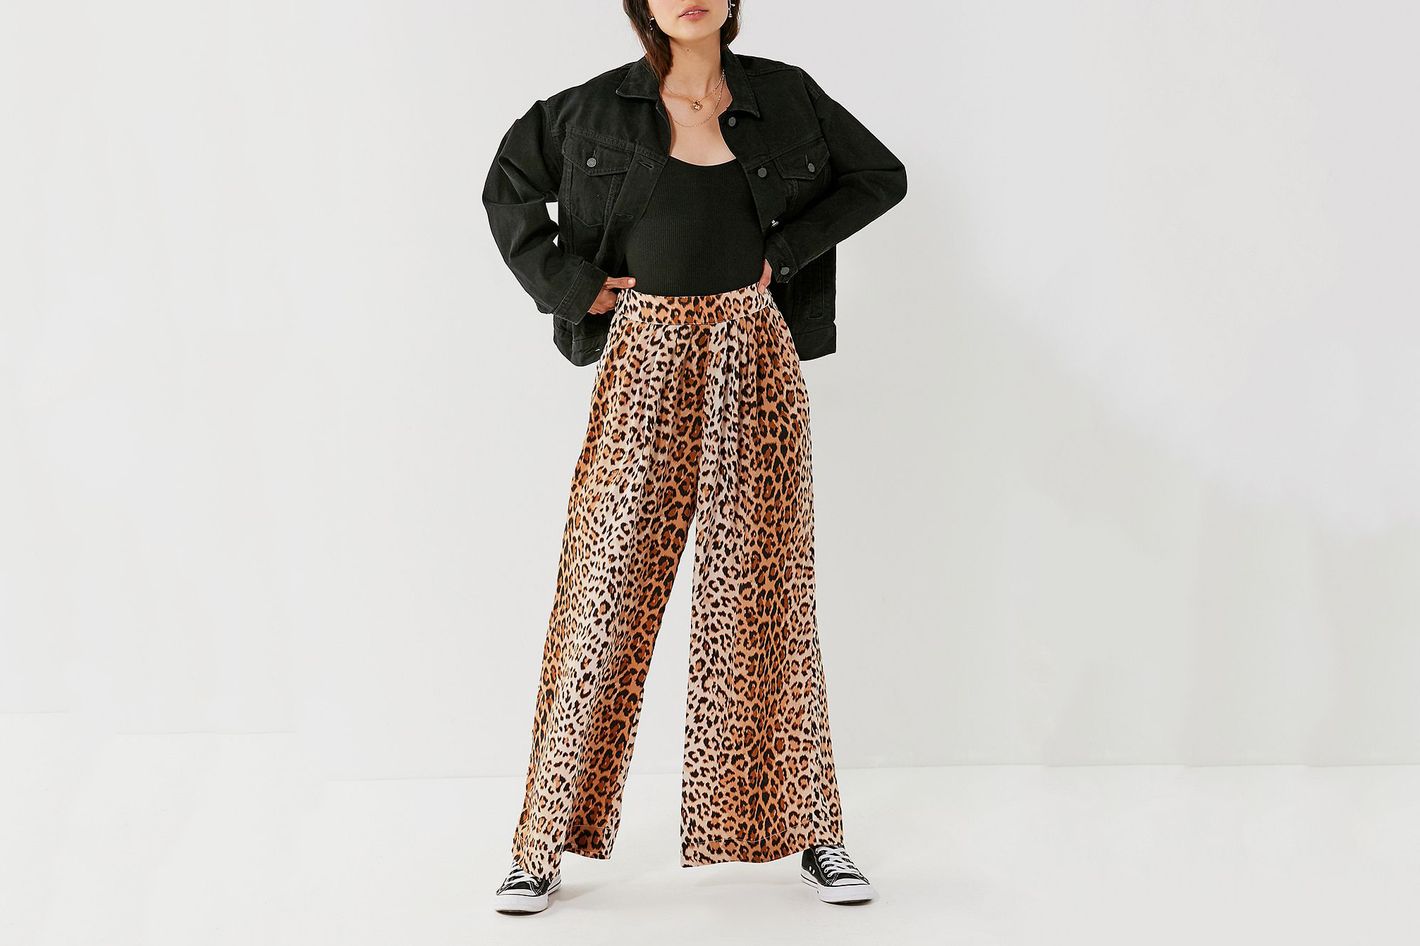 The 15 Best Patterned Pants for Warm Weather